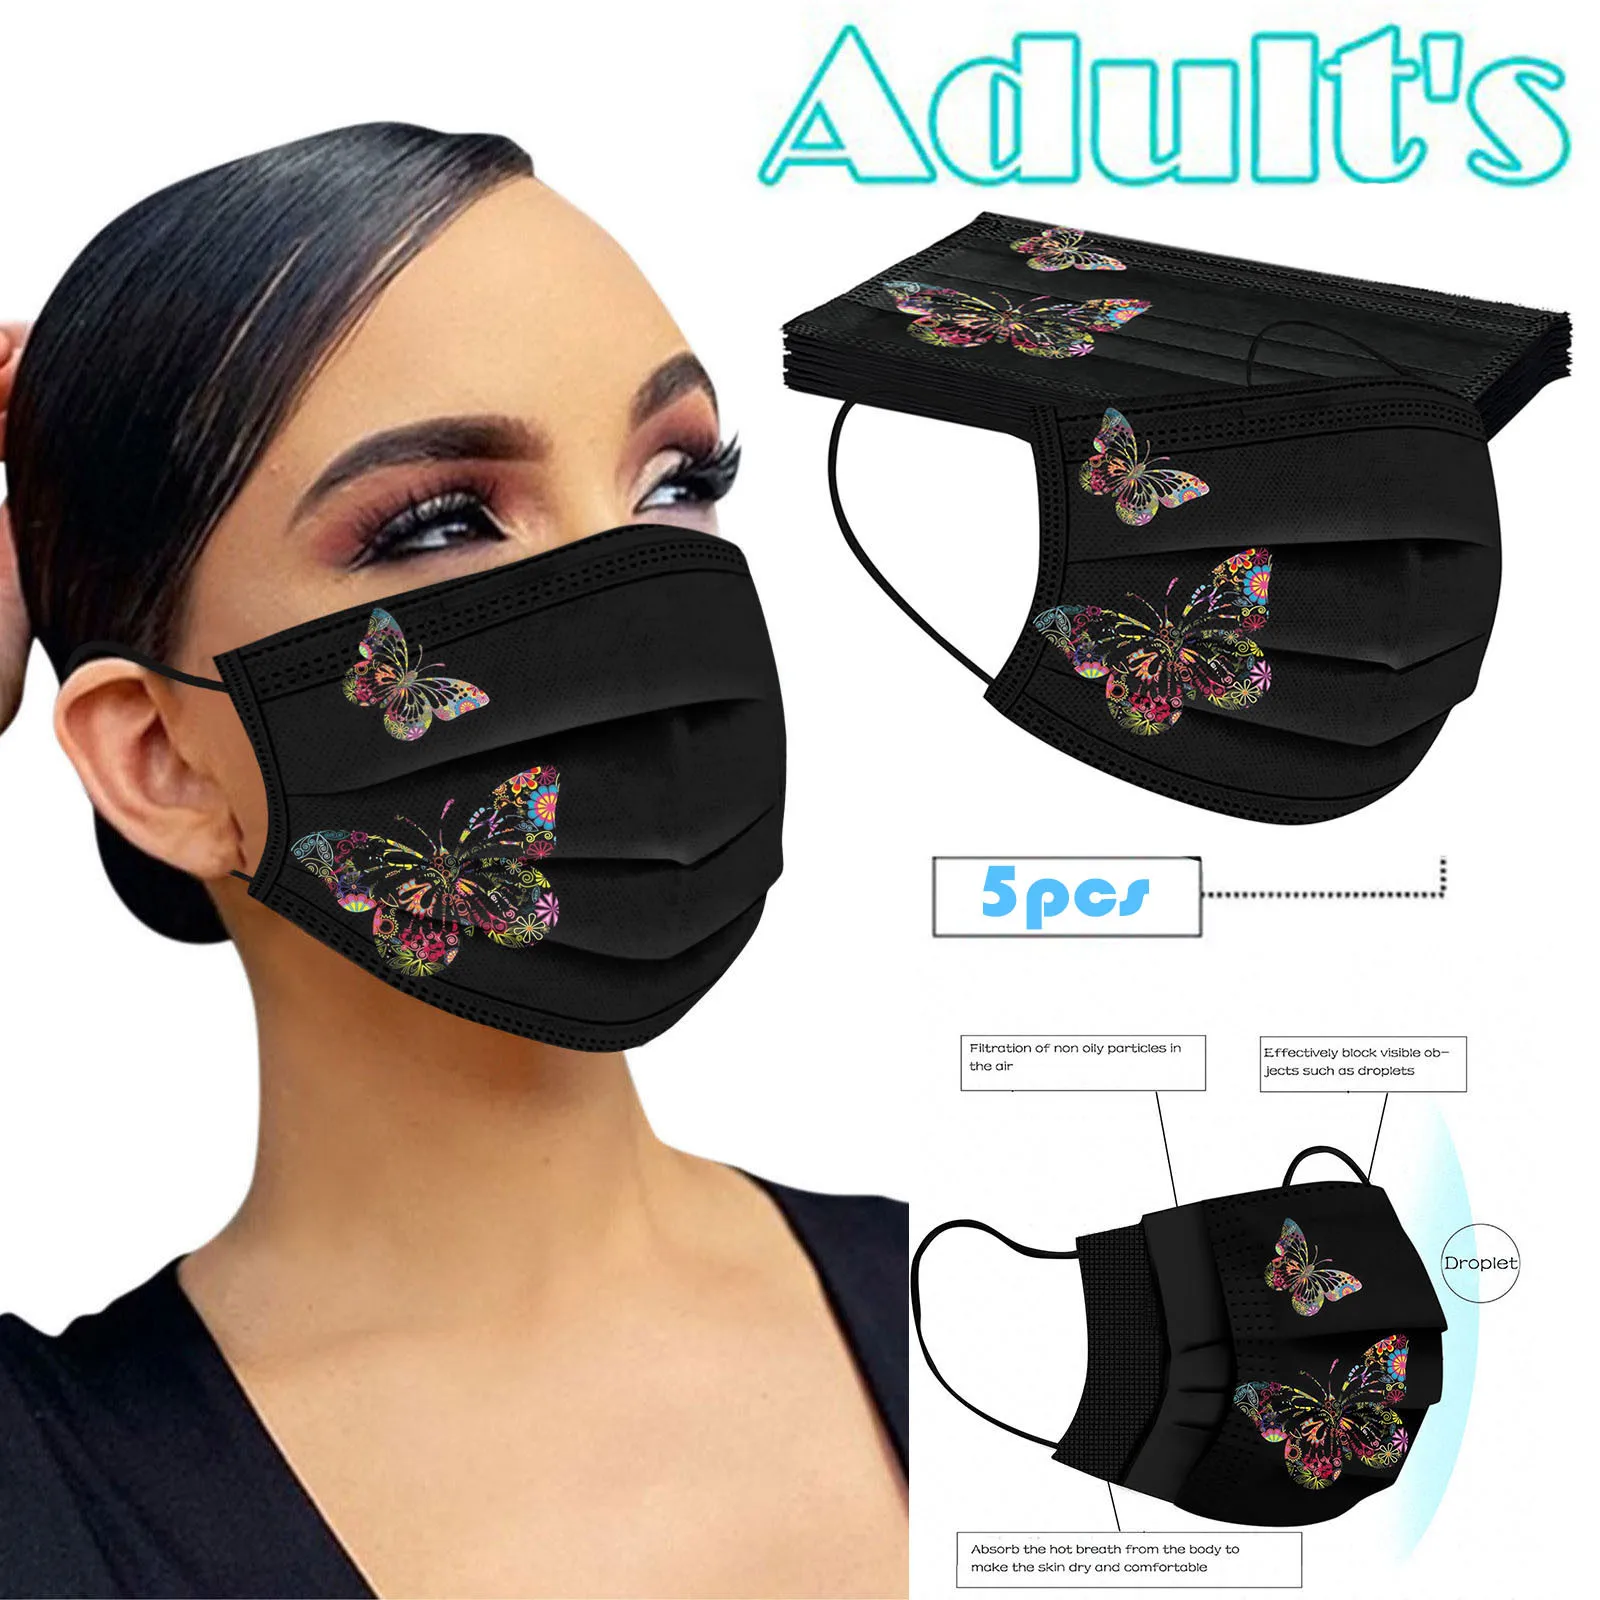 

10pc Butterfly Print Mask Adult Masque Women Man Disposable Face Mask 3ply Ear Loop Mascarillas Desechables Halloween Cosplay